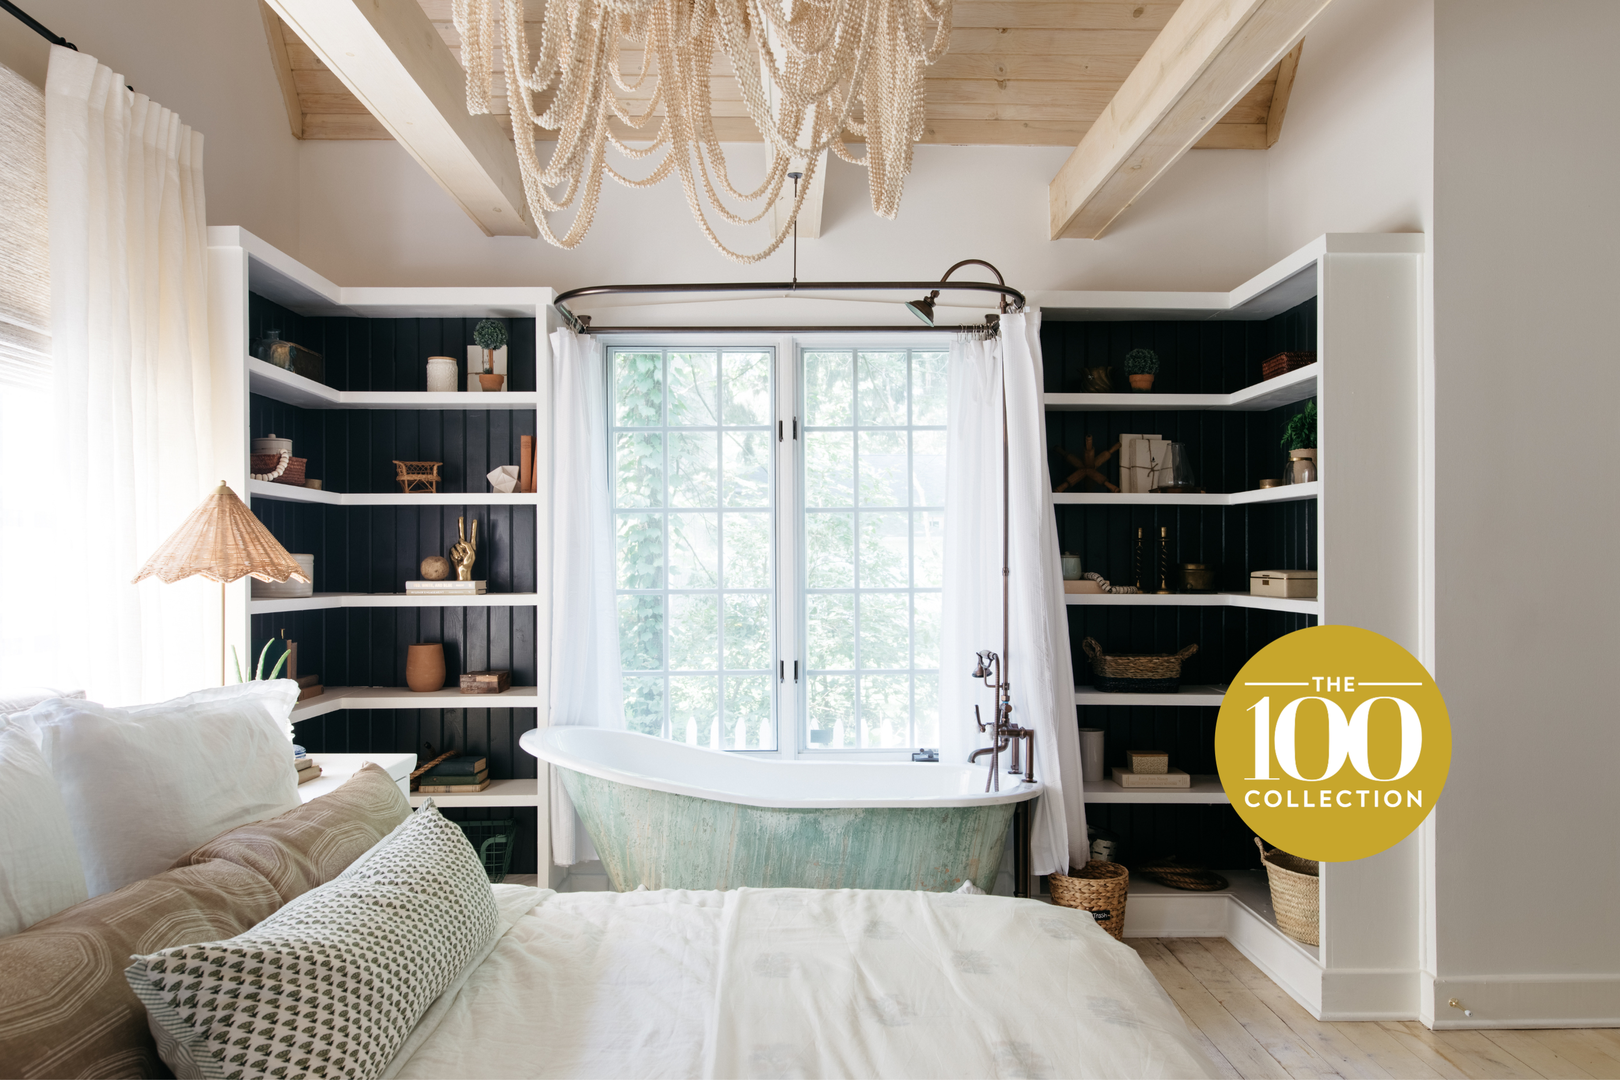 Leo Cottage is part of the prestigious 100 Collection.